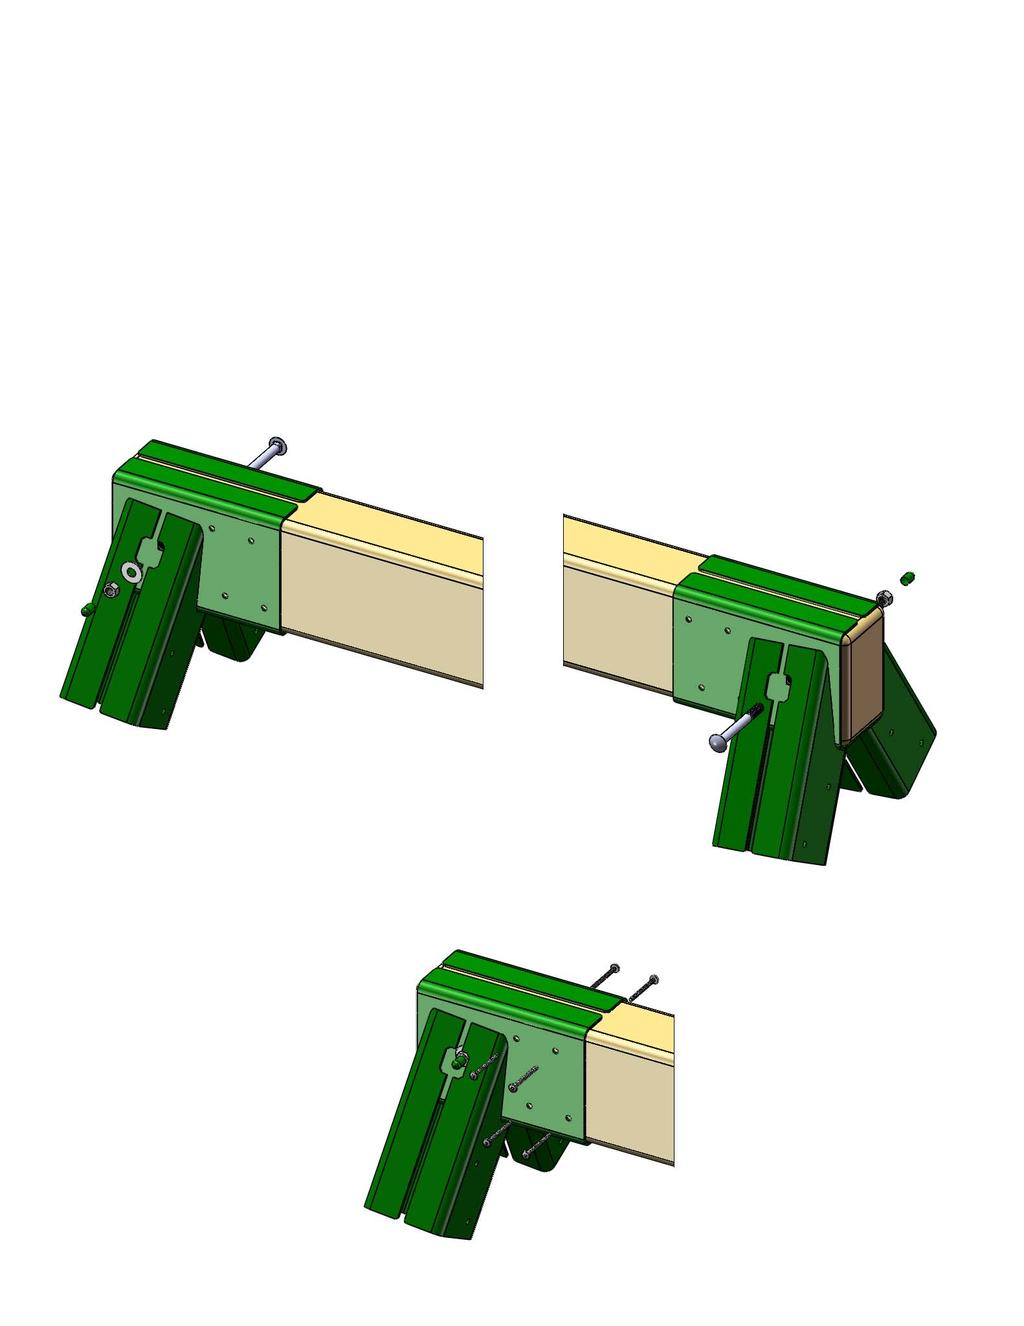 STEP 2: SWING LEG BRACKETS 1: FIND THE FOUR HALVES OF THE SWING LEG BRACKETS. 2: MATCH UP THE BRACKETS SO THAT THE HOLES FOR THE LEGS WILL ANGLE AWAY FROM THE SWING AREA.